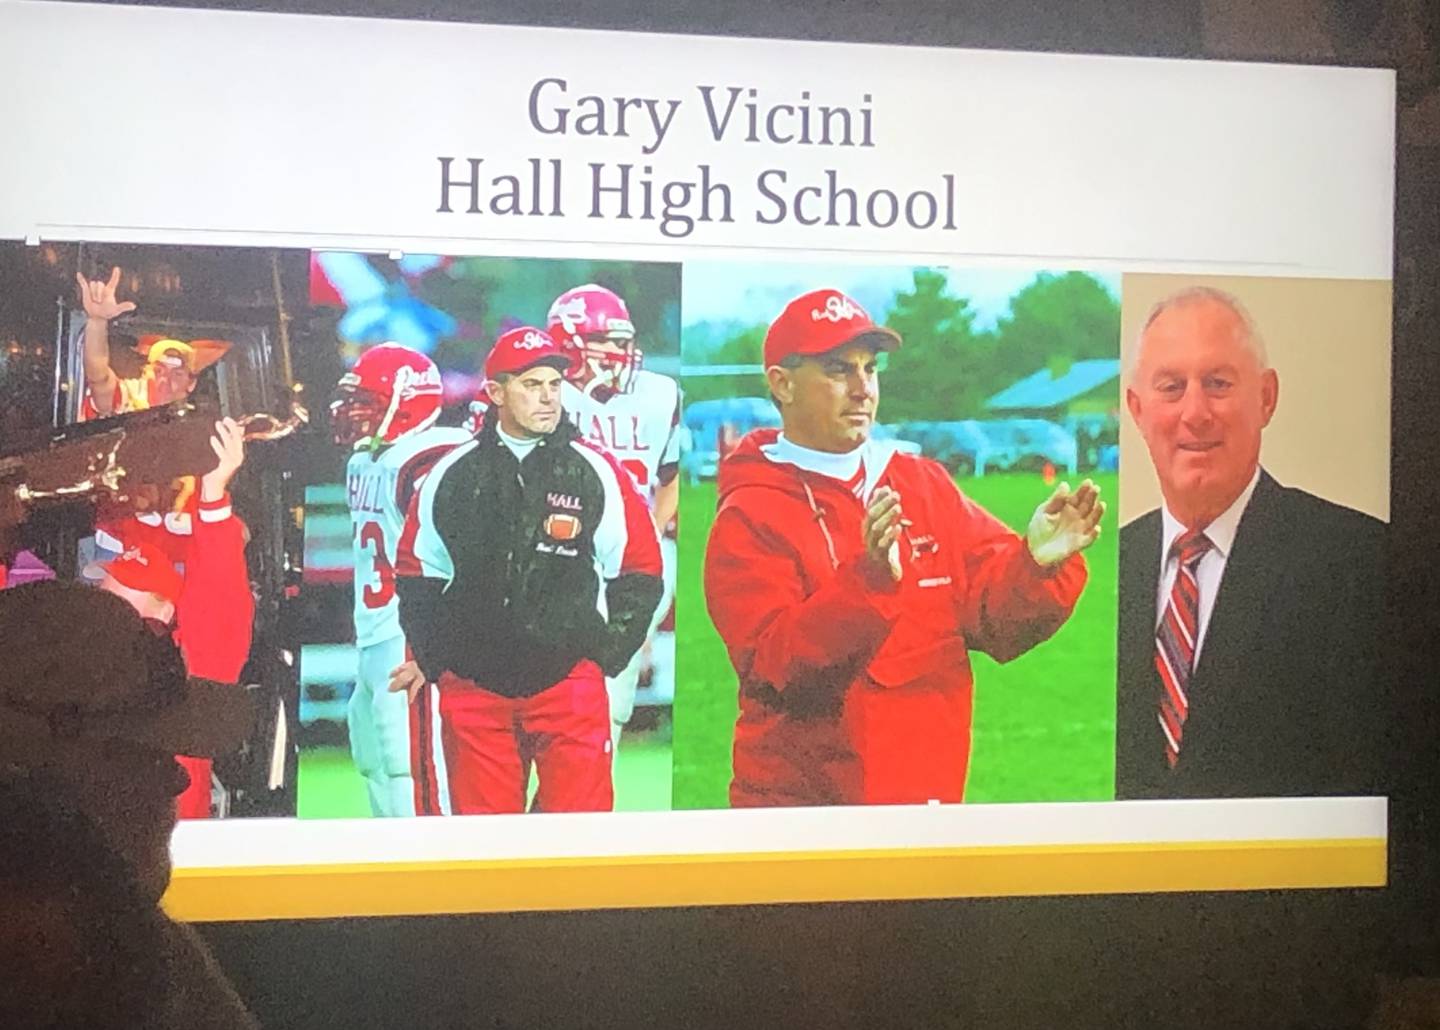 Two-time state champion football coach Gary Vicini was inducted into the NewsTribune's Illinois Valley Sports Hall of Fame.